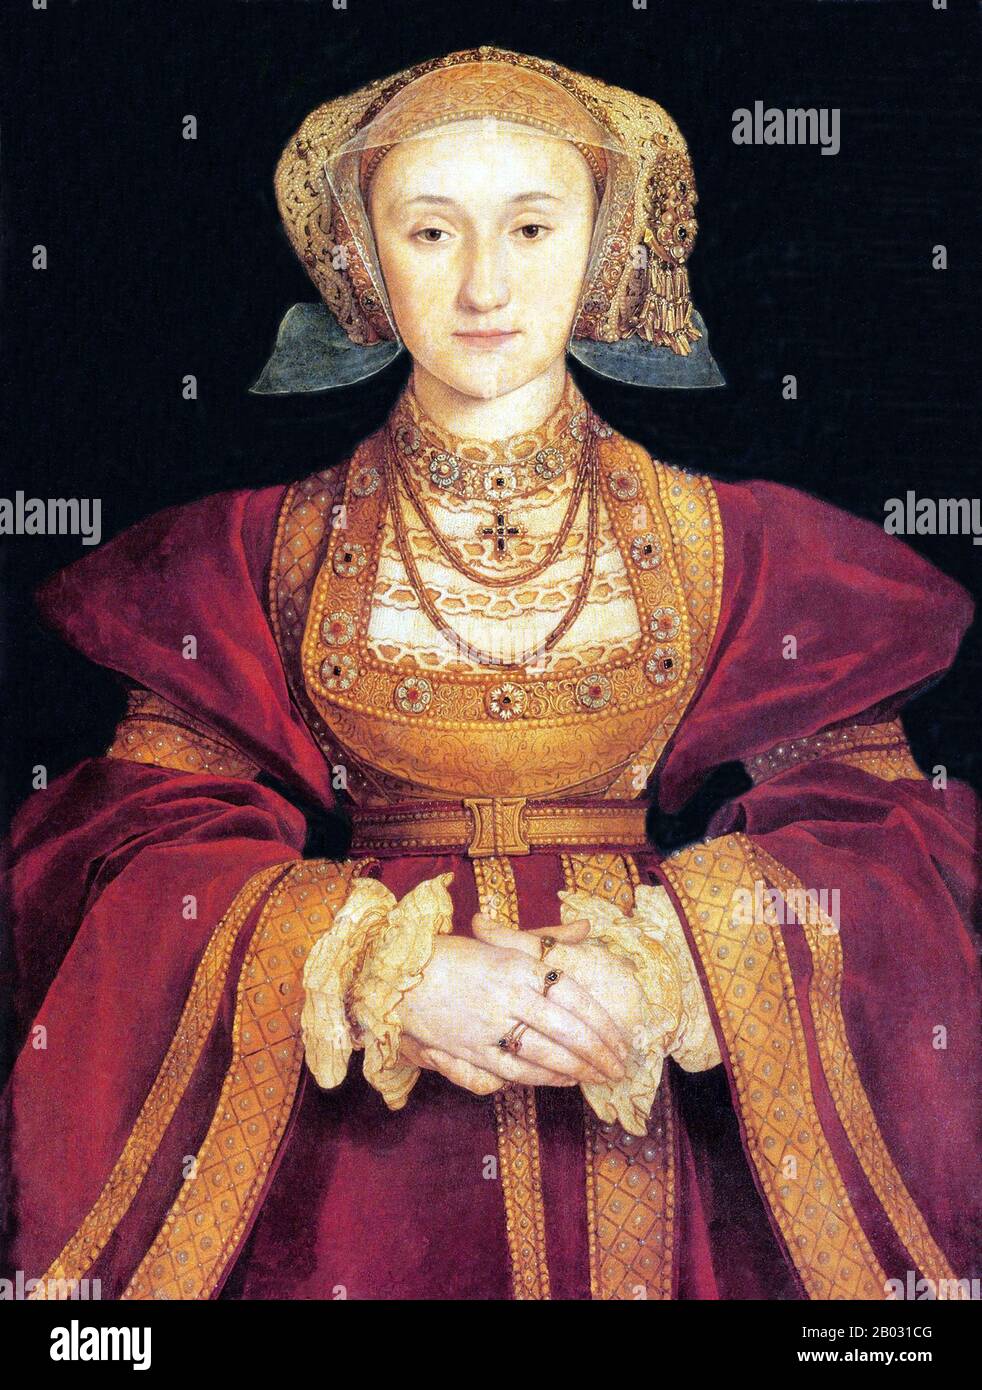 Anne of Cleves (German: Anna; 22 September 1515 – 16 July 1557) was Queen of England from 6 January 1540 to 9 July 1540 as the fourth wife of King Henry VIII. The marriage was declared never consummated and, as a result, she was not crowned queen consort.  Following the annulment of their marriage, Anne was given a generous settlement by the King, and thereafter referred to as the King's Beloved Sister. She lived to see the coronation of Queen Mary I, outliving the rest of Henry's wives. Stock Photo